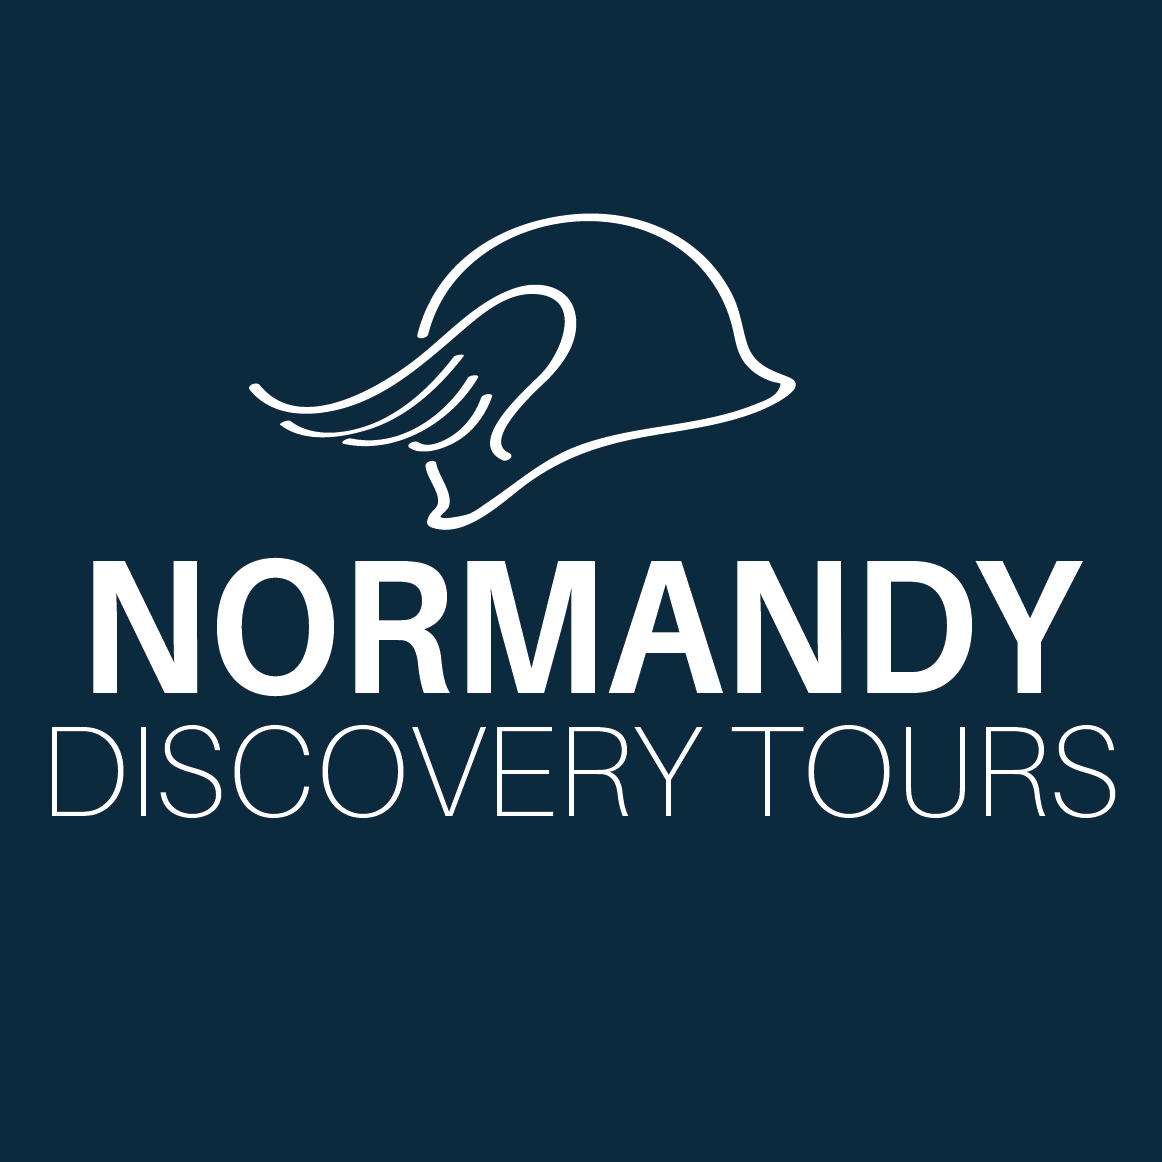 Normandy Discover Tours